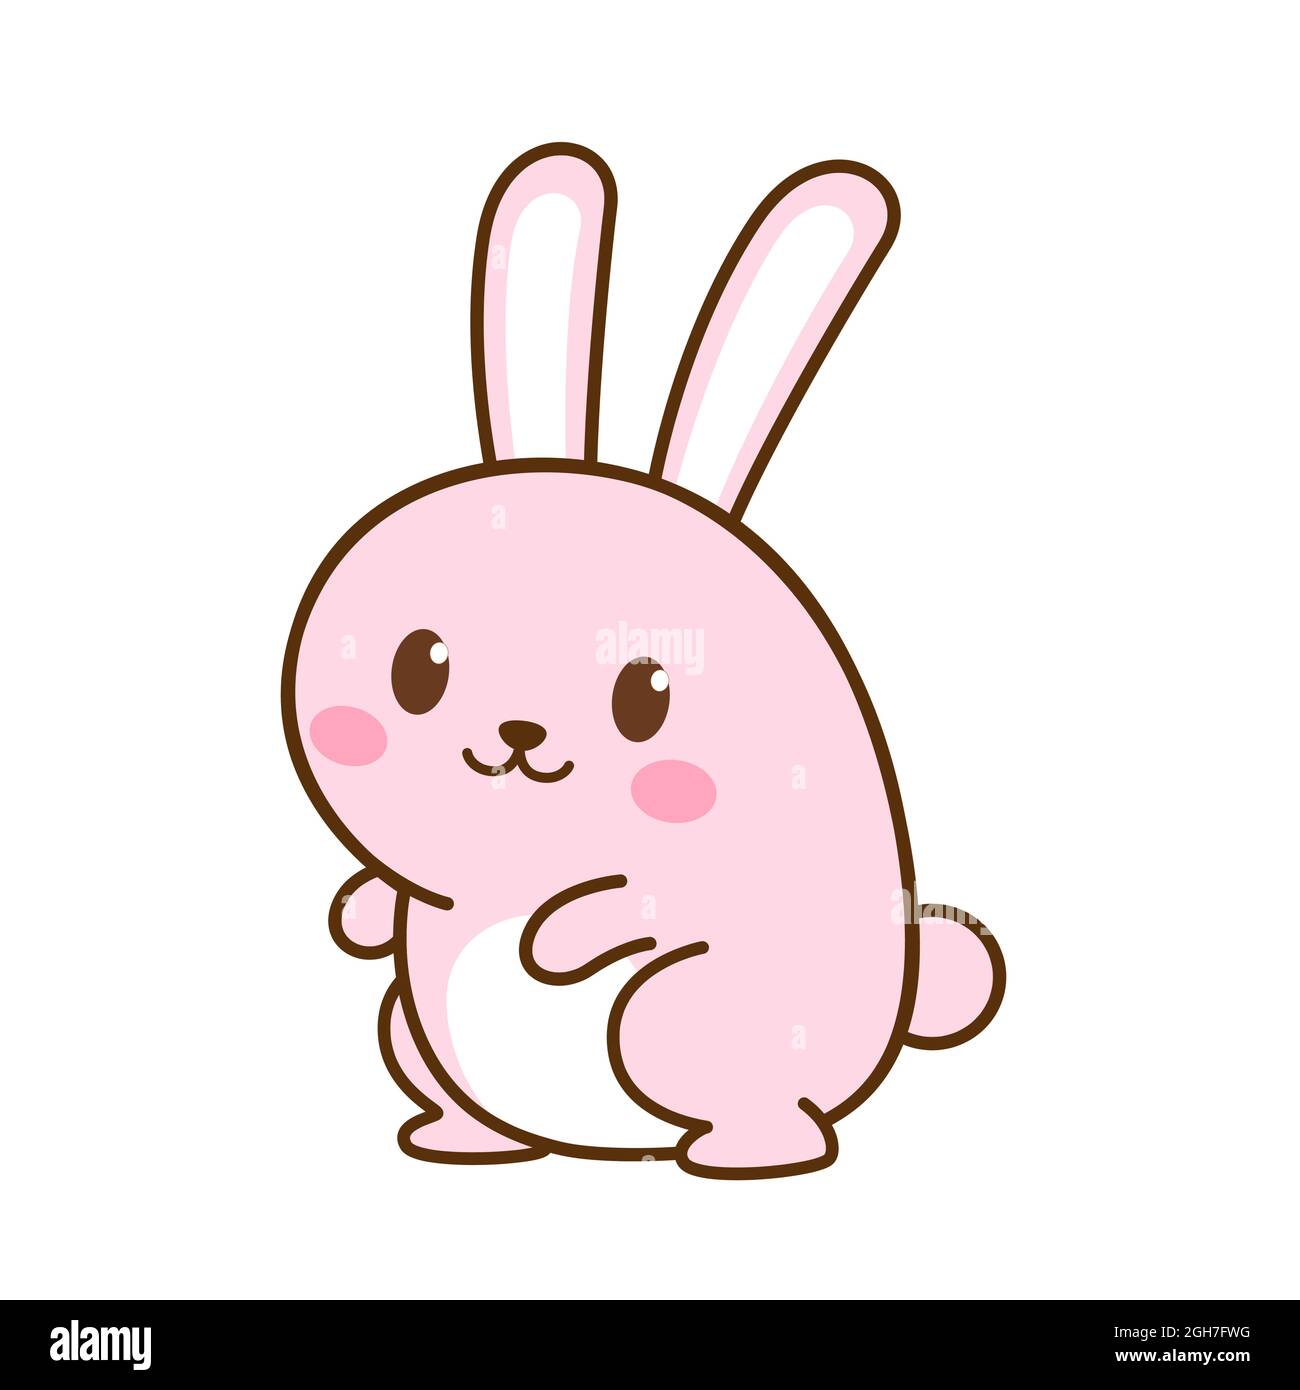 Animal character. A pink cute rabbit standing on white background. Stock Vector